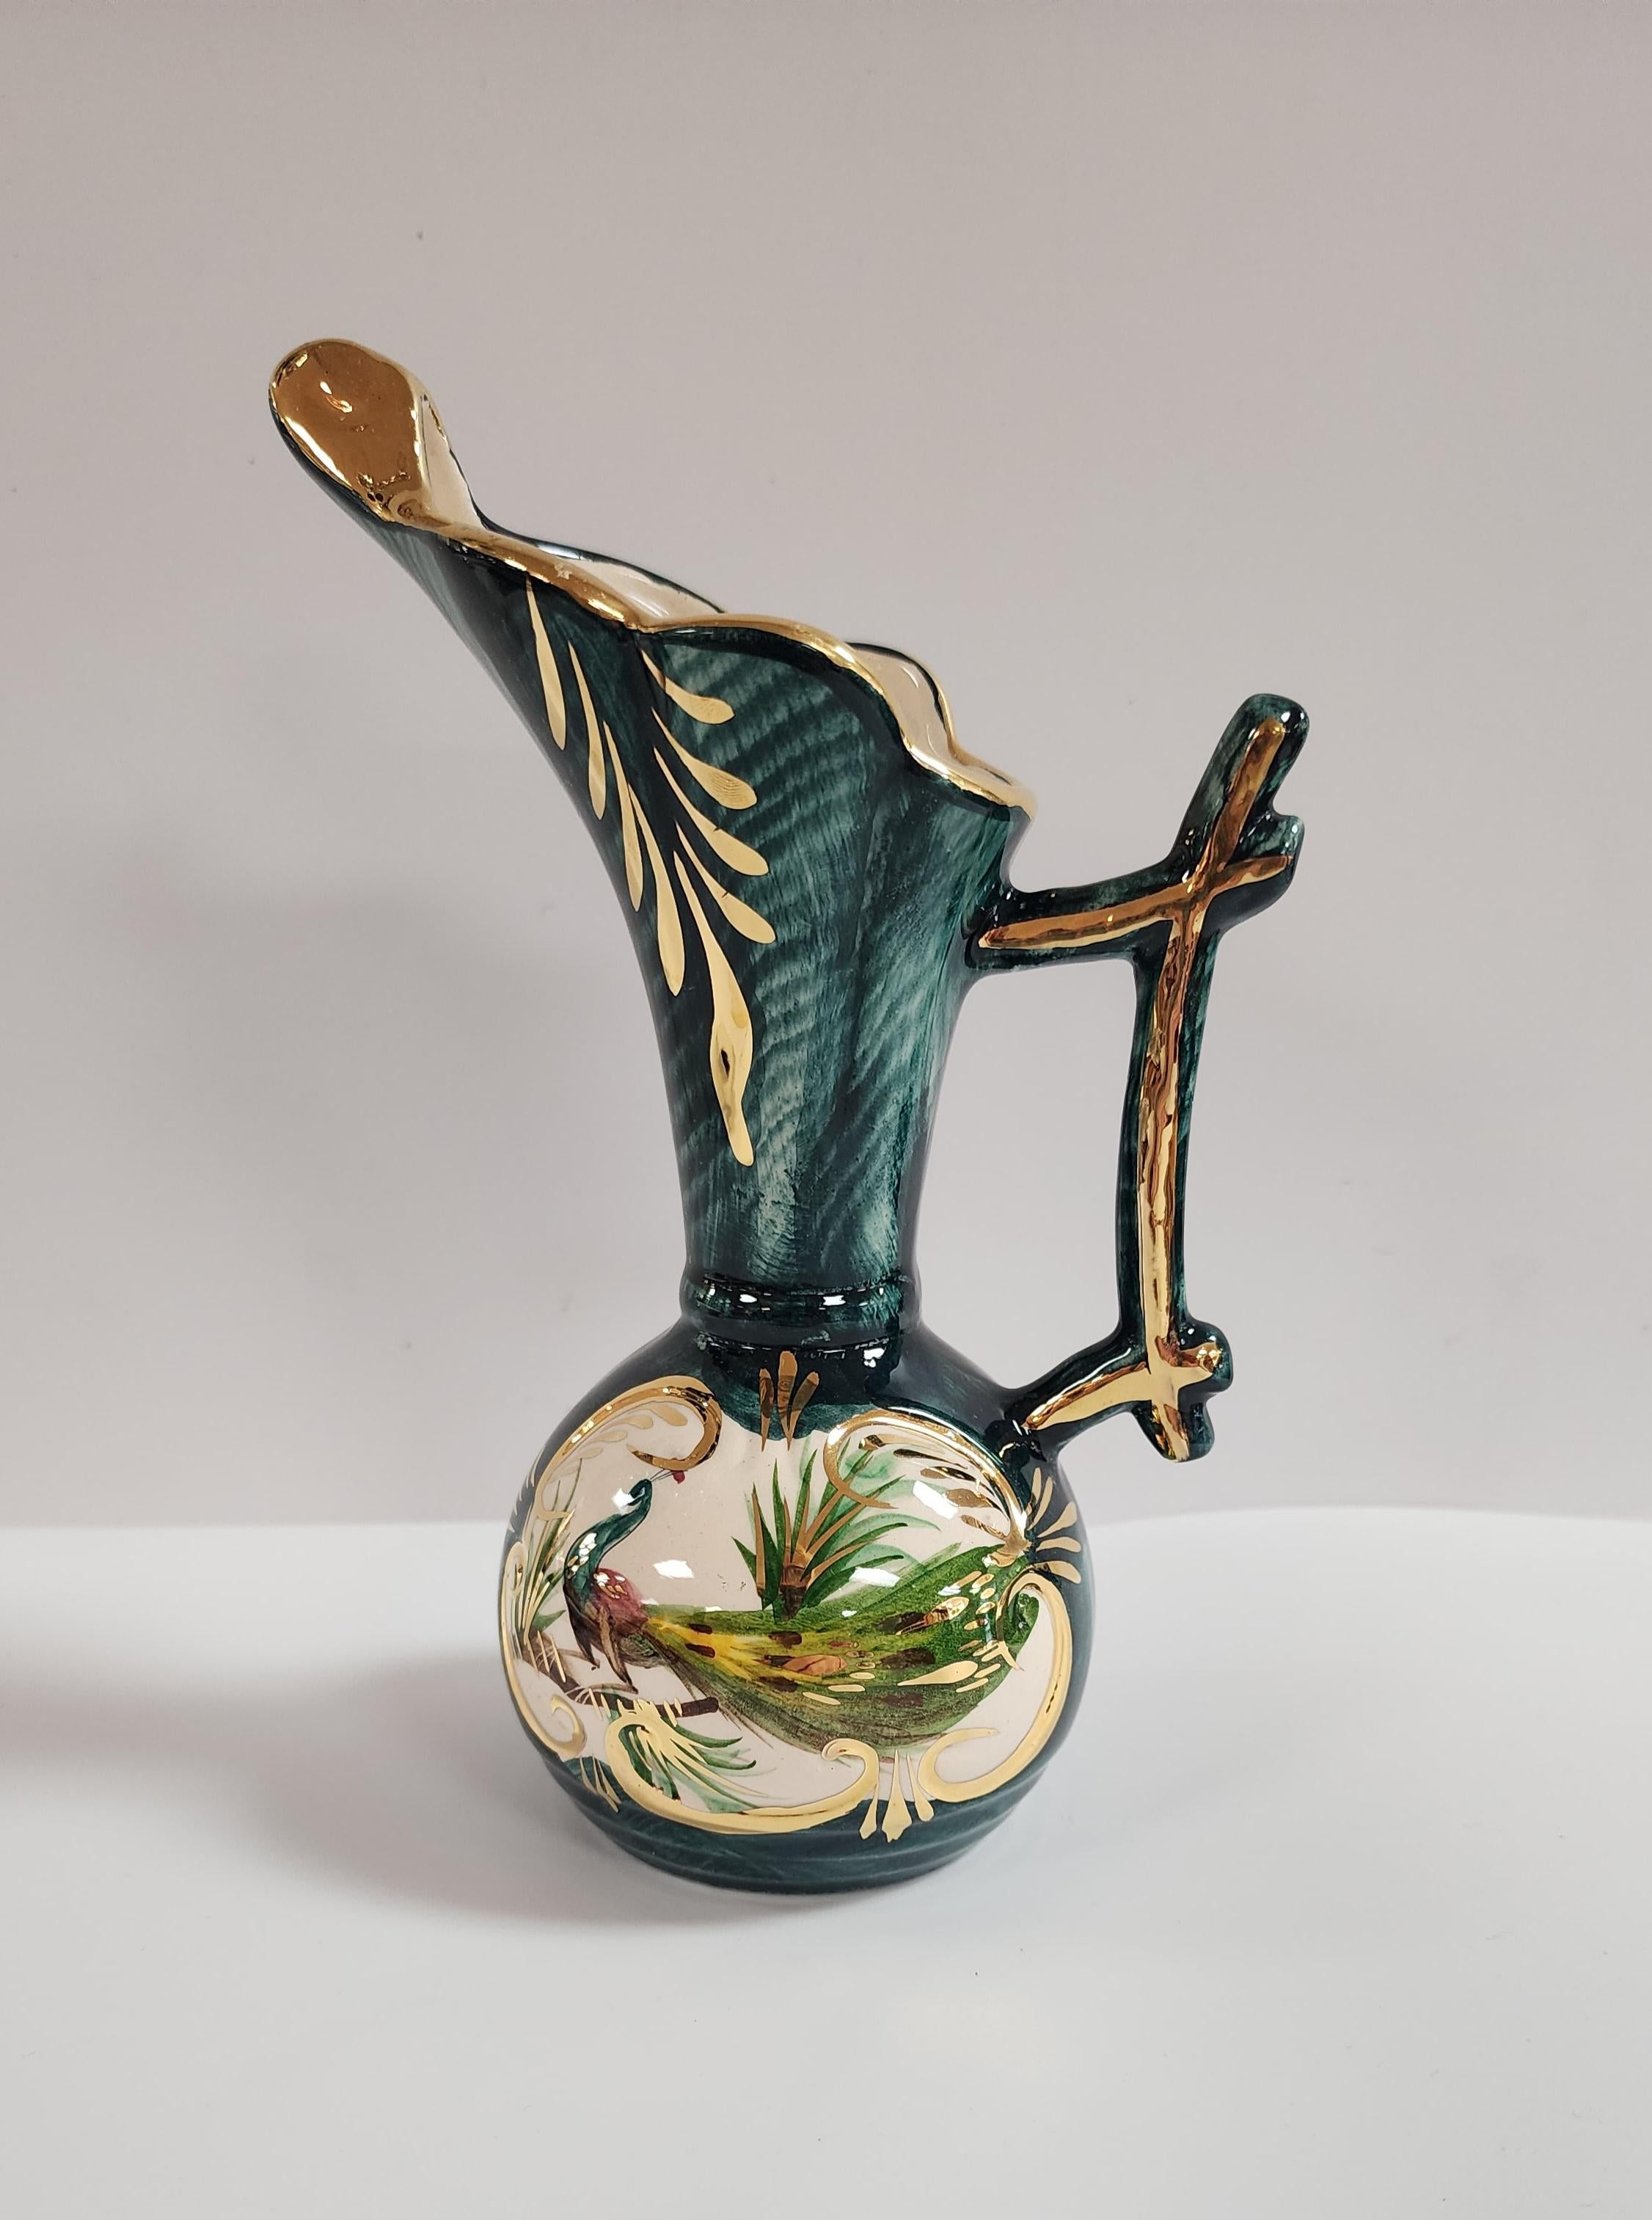 Very nice example of porcelain artist Hubert Bequet, this hand painted vase shows an artfully portrayed peacock with green field and gold accents. The bottom is stamped and the mark is clear and legible. 